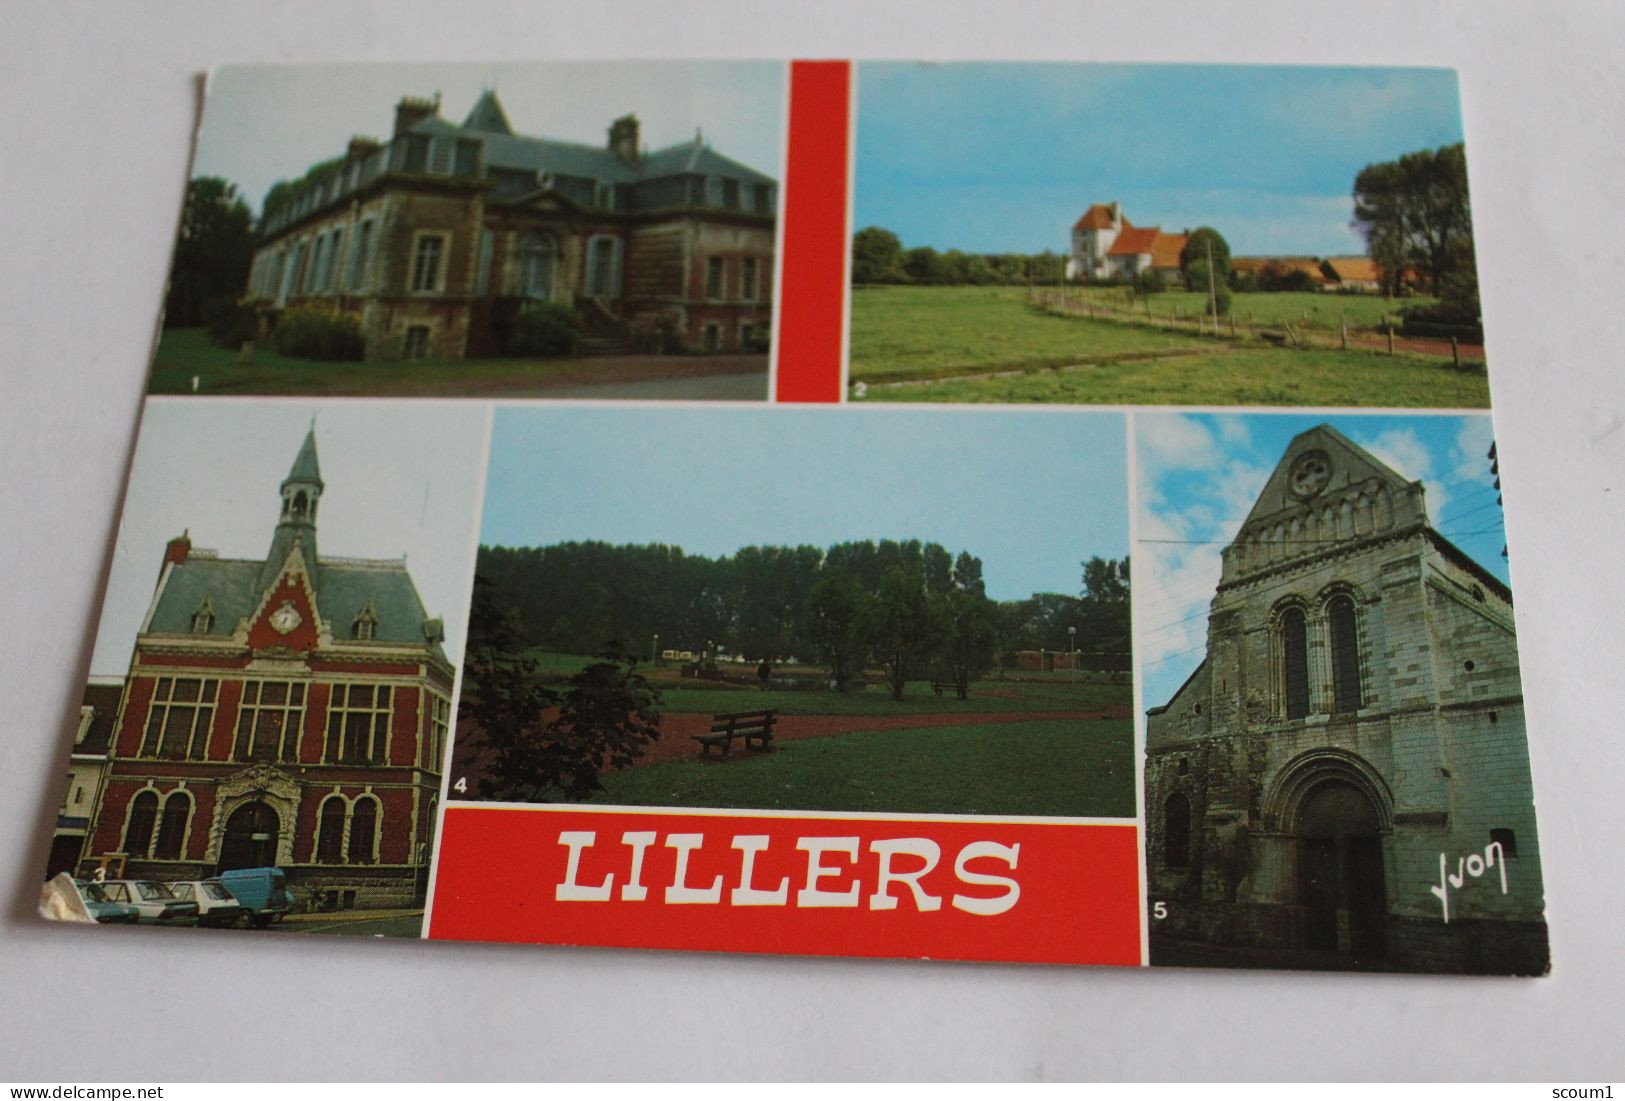 Lillers Multivues - Lillers